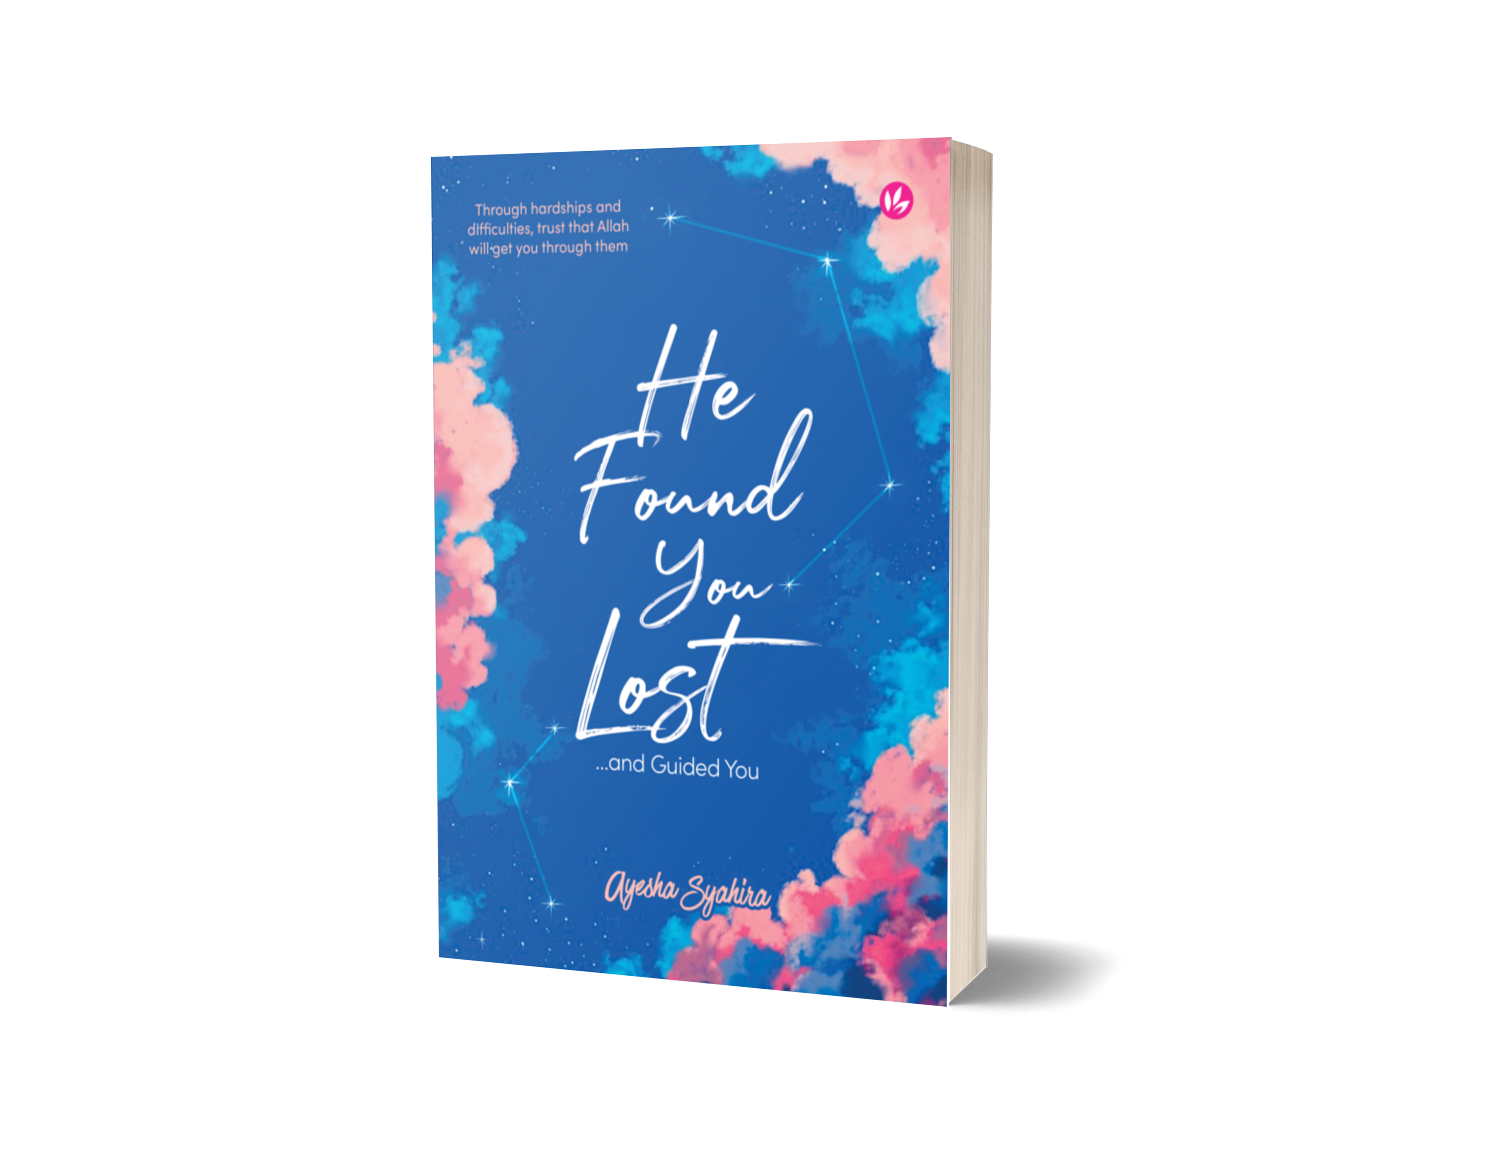 Iman Publication Book He Found You LOST, and Guided You by Ayesha Syahira 201540